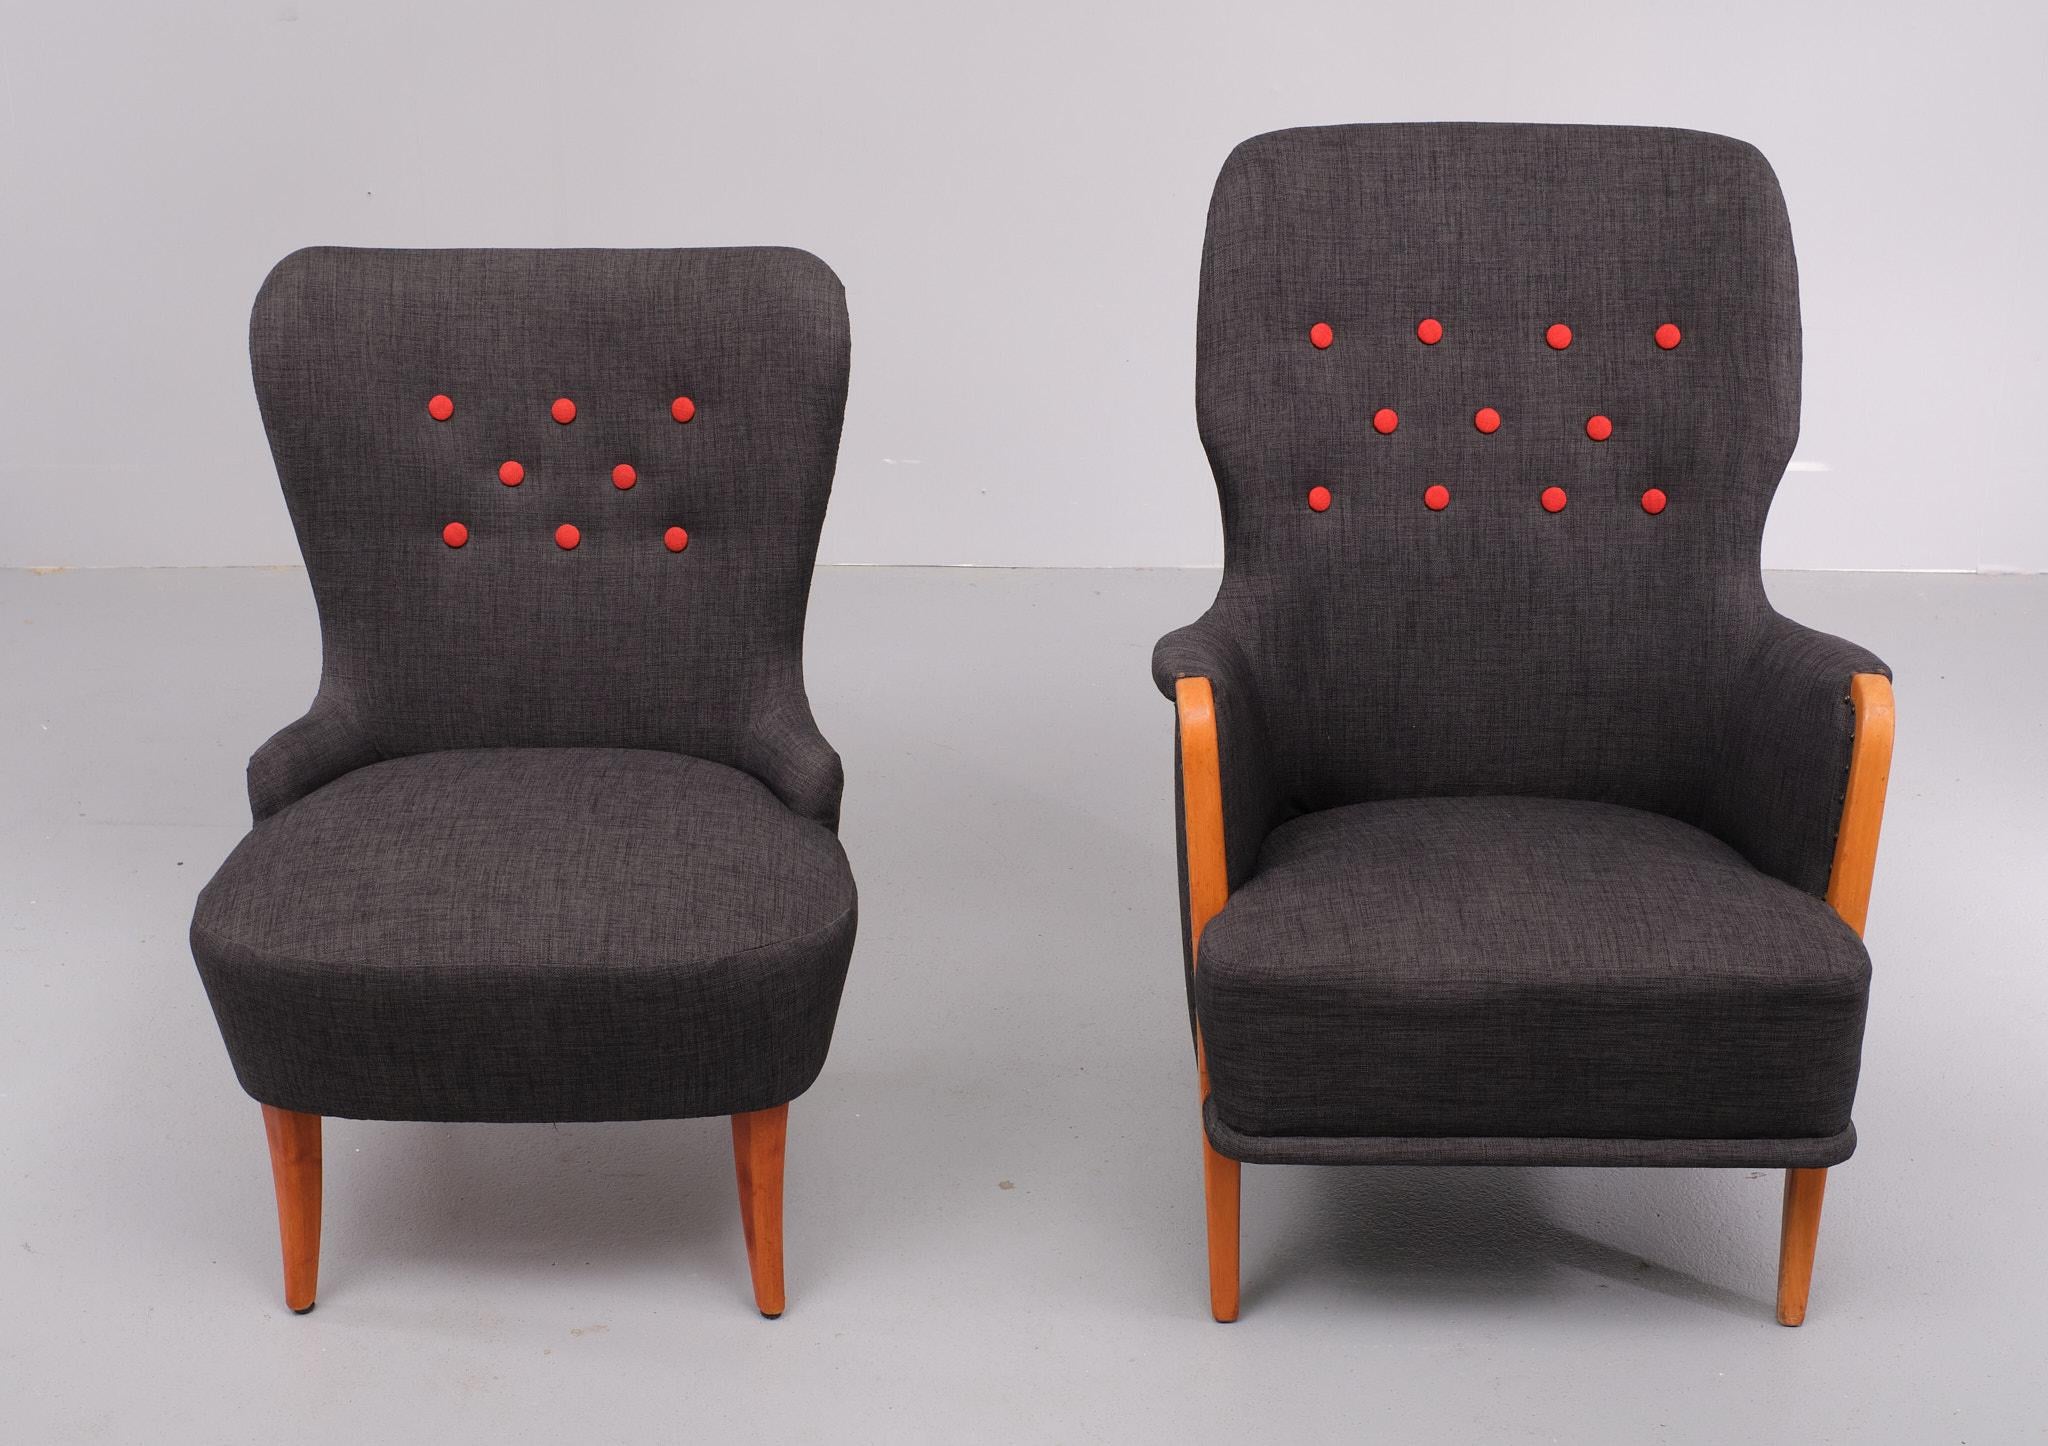 For Him and Her  Easy chairs and matching ottoman . 1950s   (Mitte des 20. Jahrhunderts) im Angebot